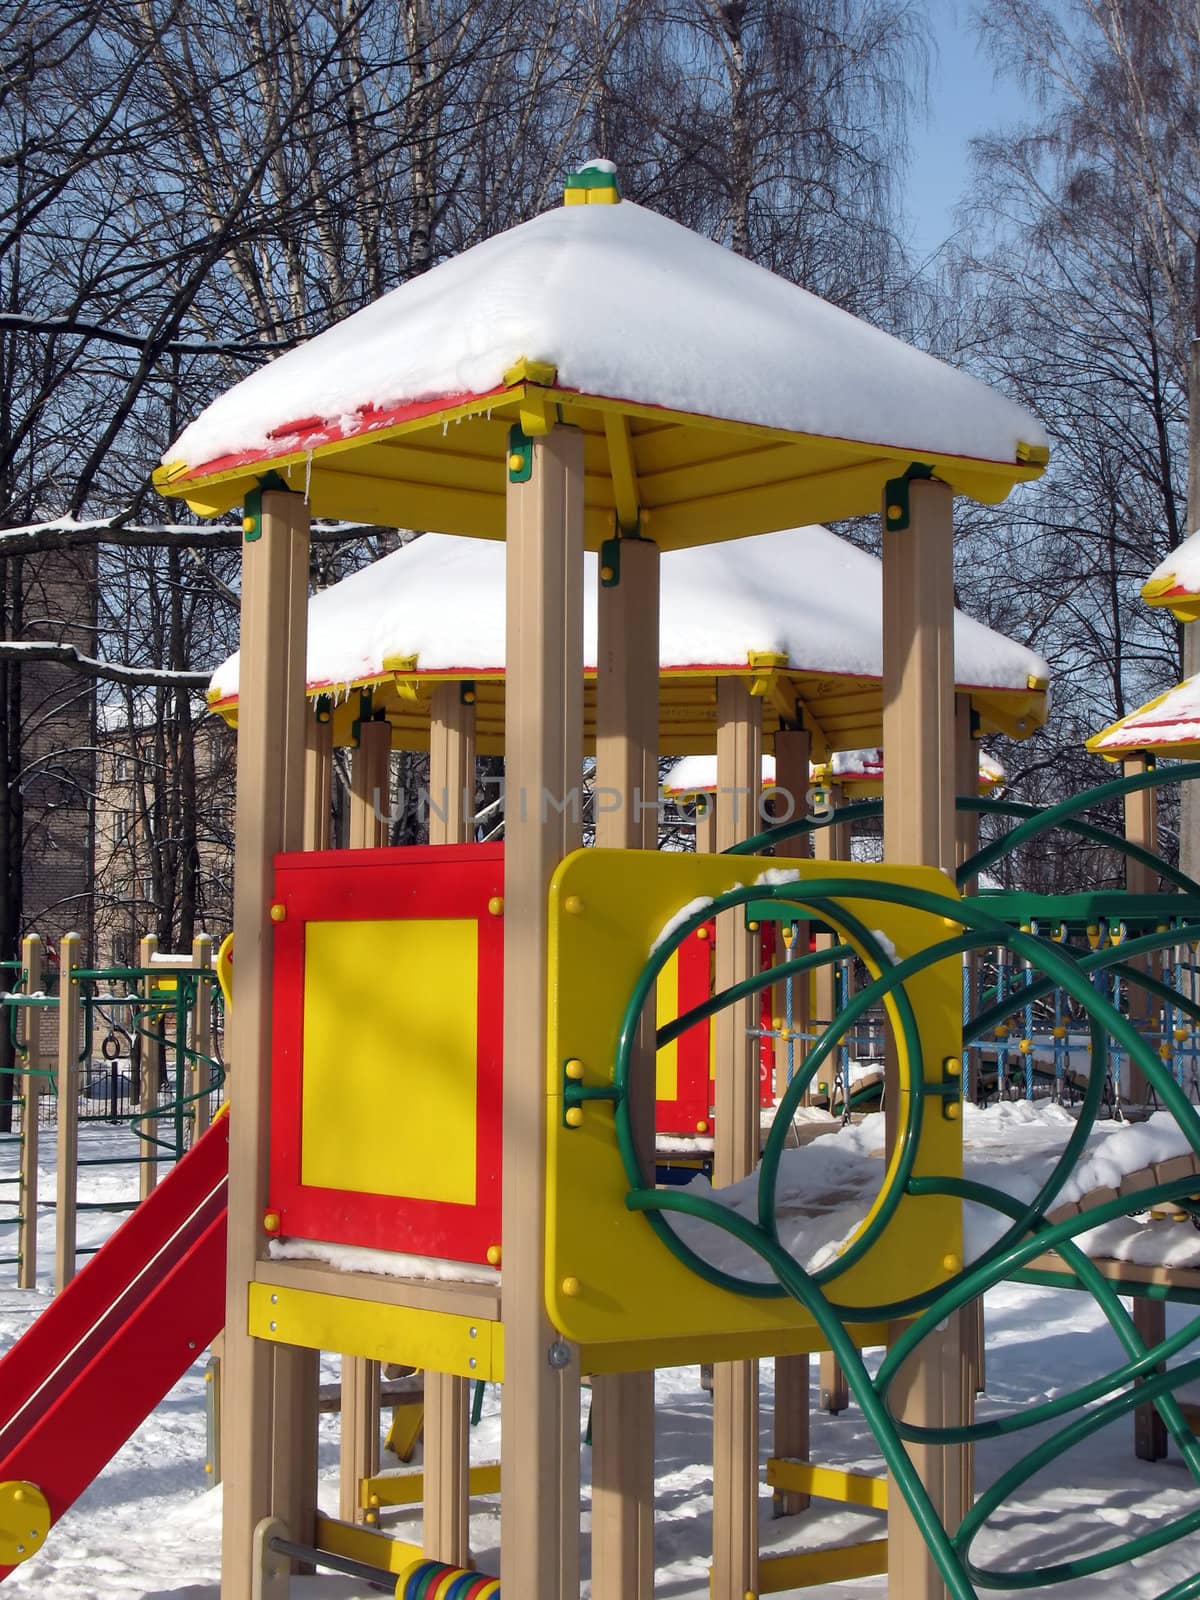 A playground on winter sunny day.